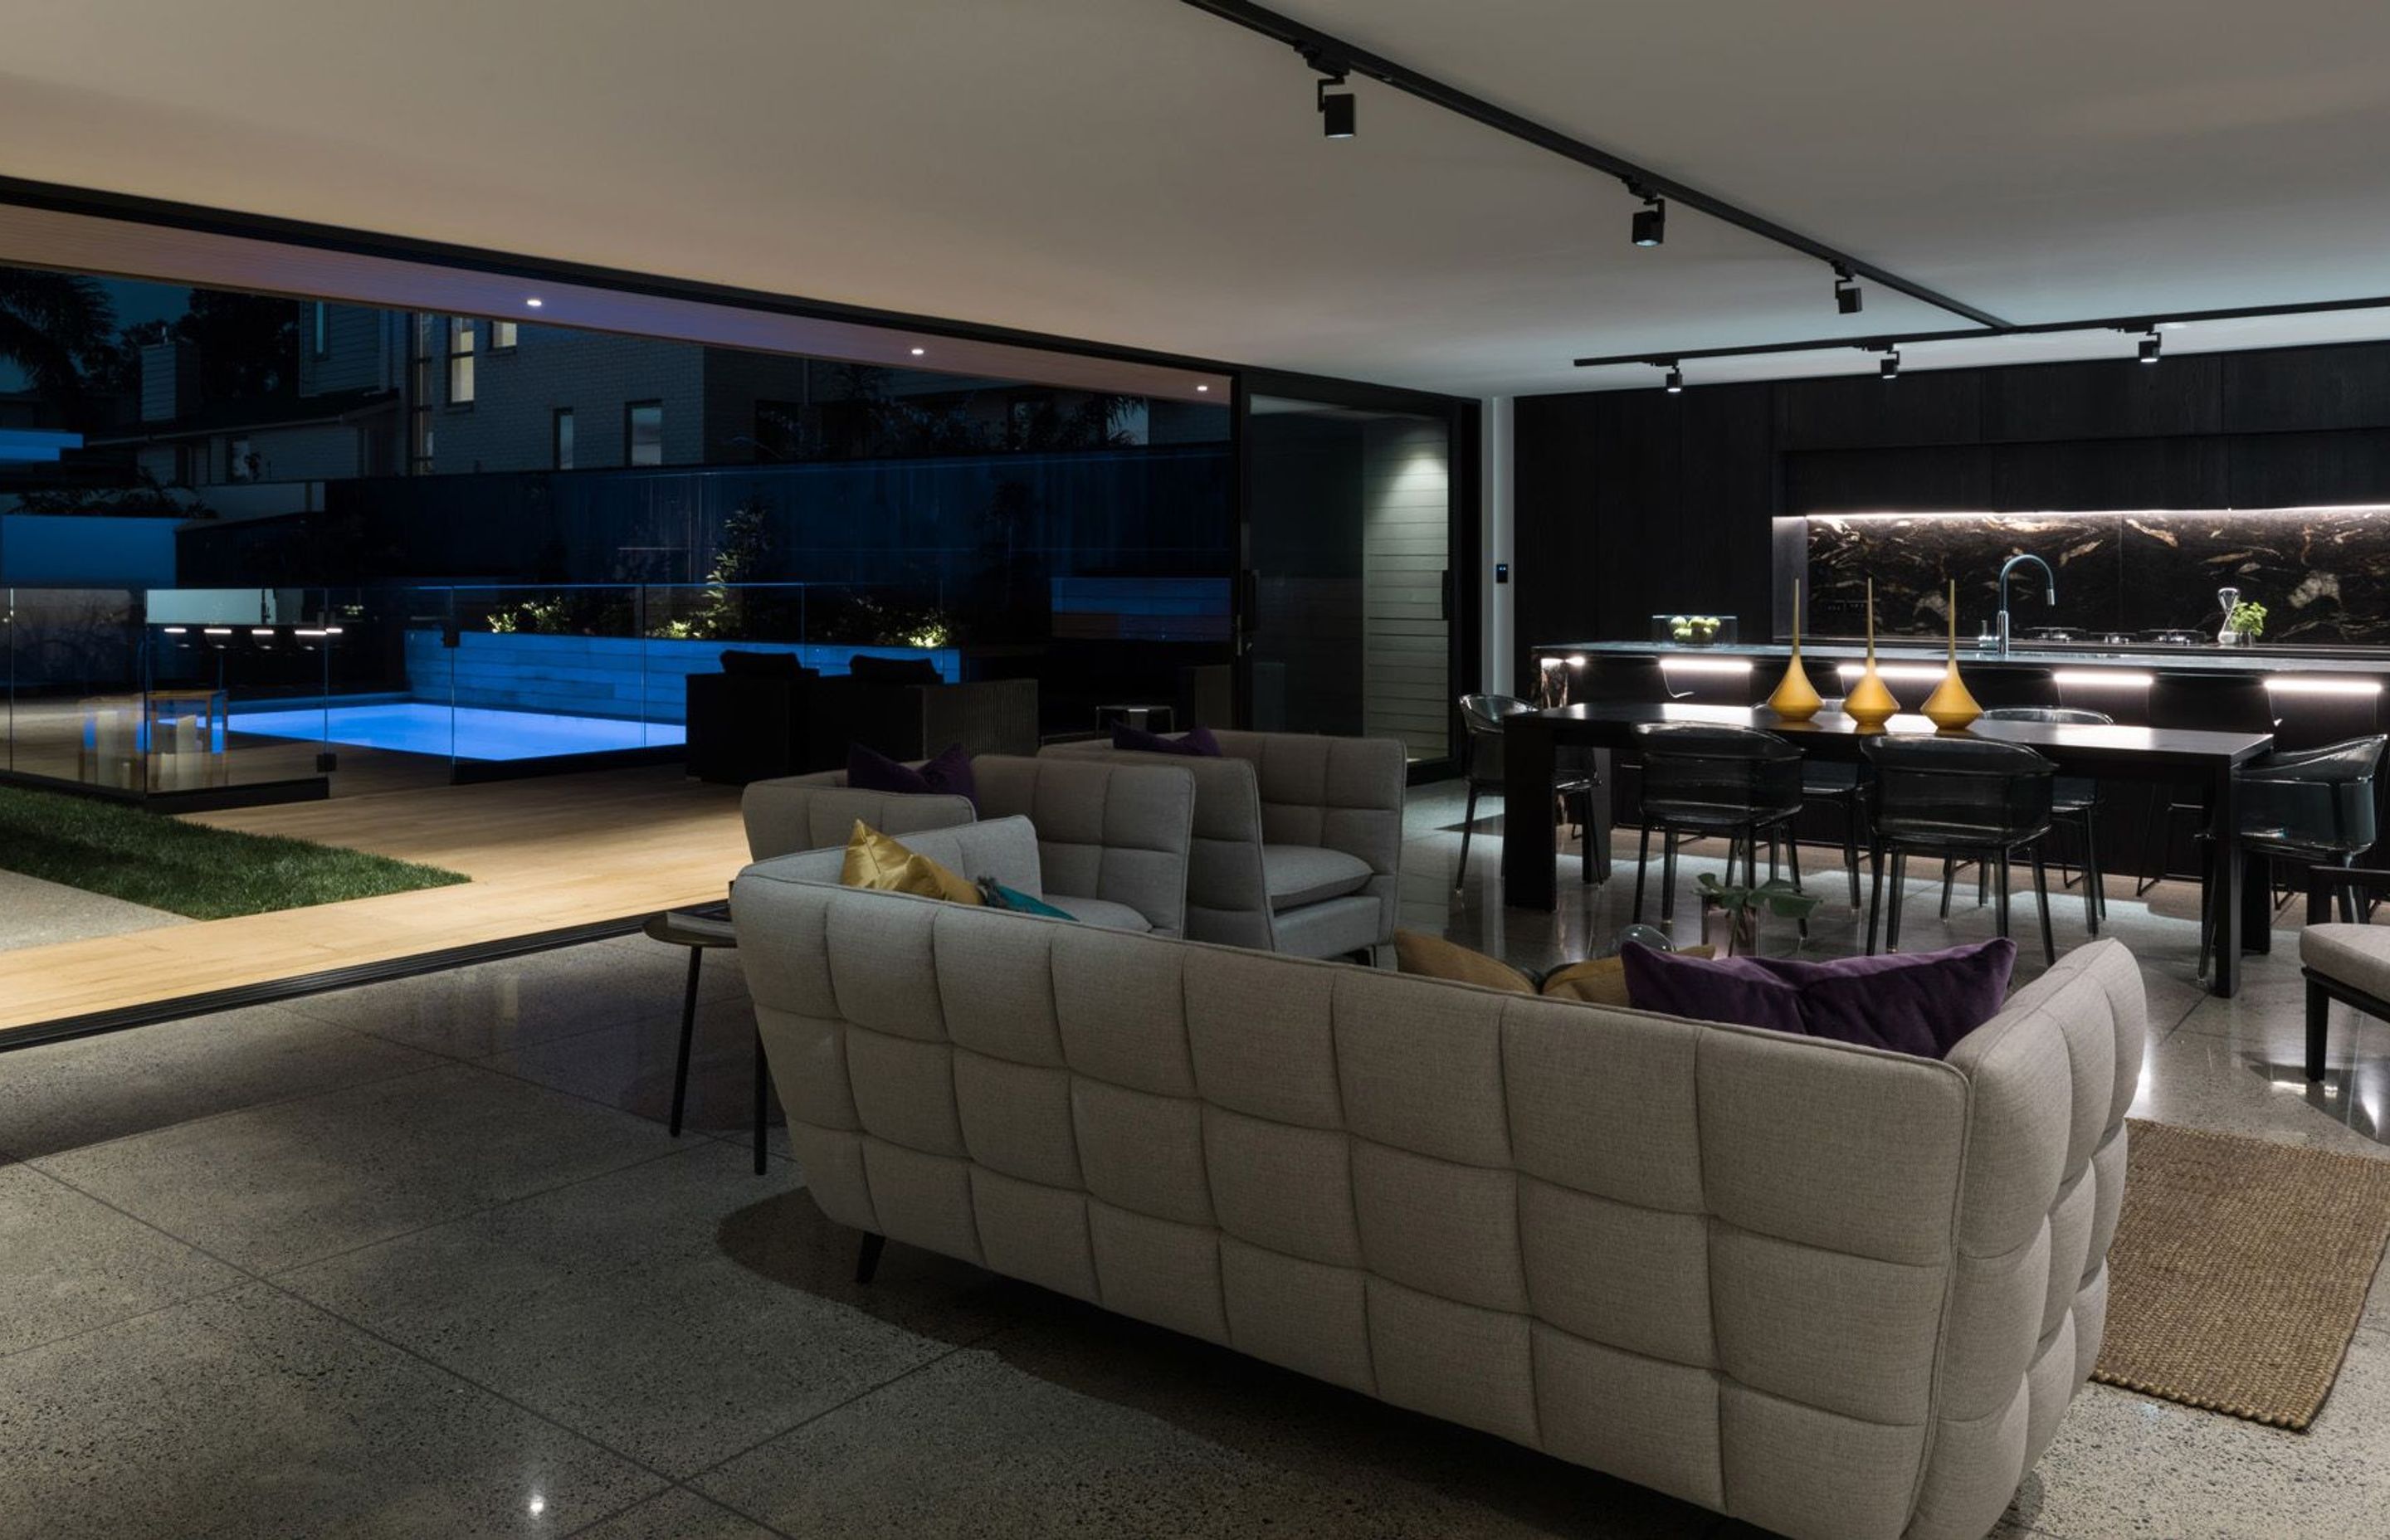 A large kitchen and living area is perfect for entertaining, with the added attraction of a swimming pool lit up like a light feature.